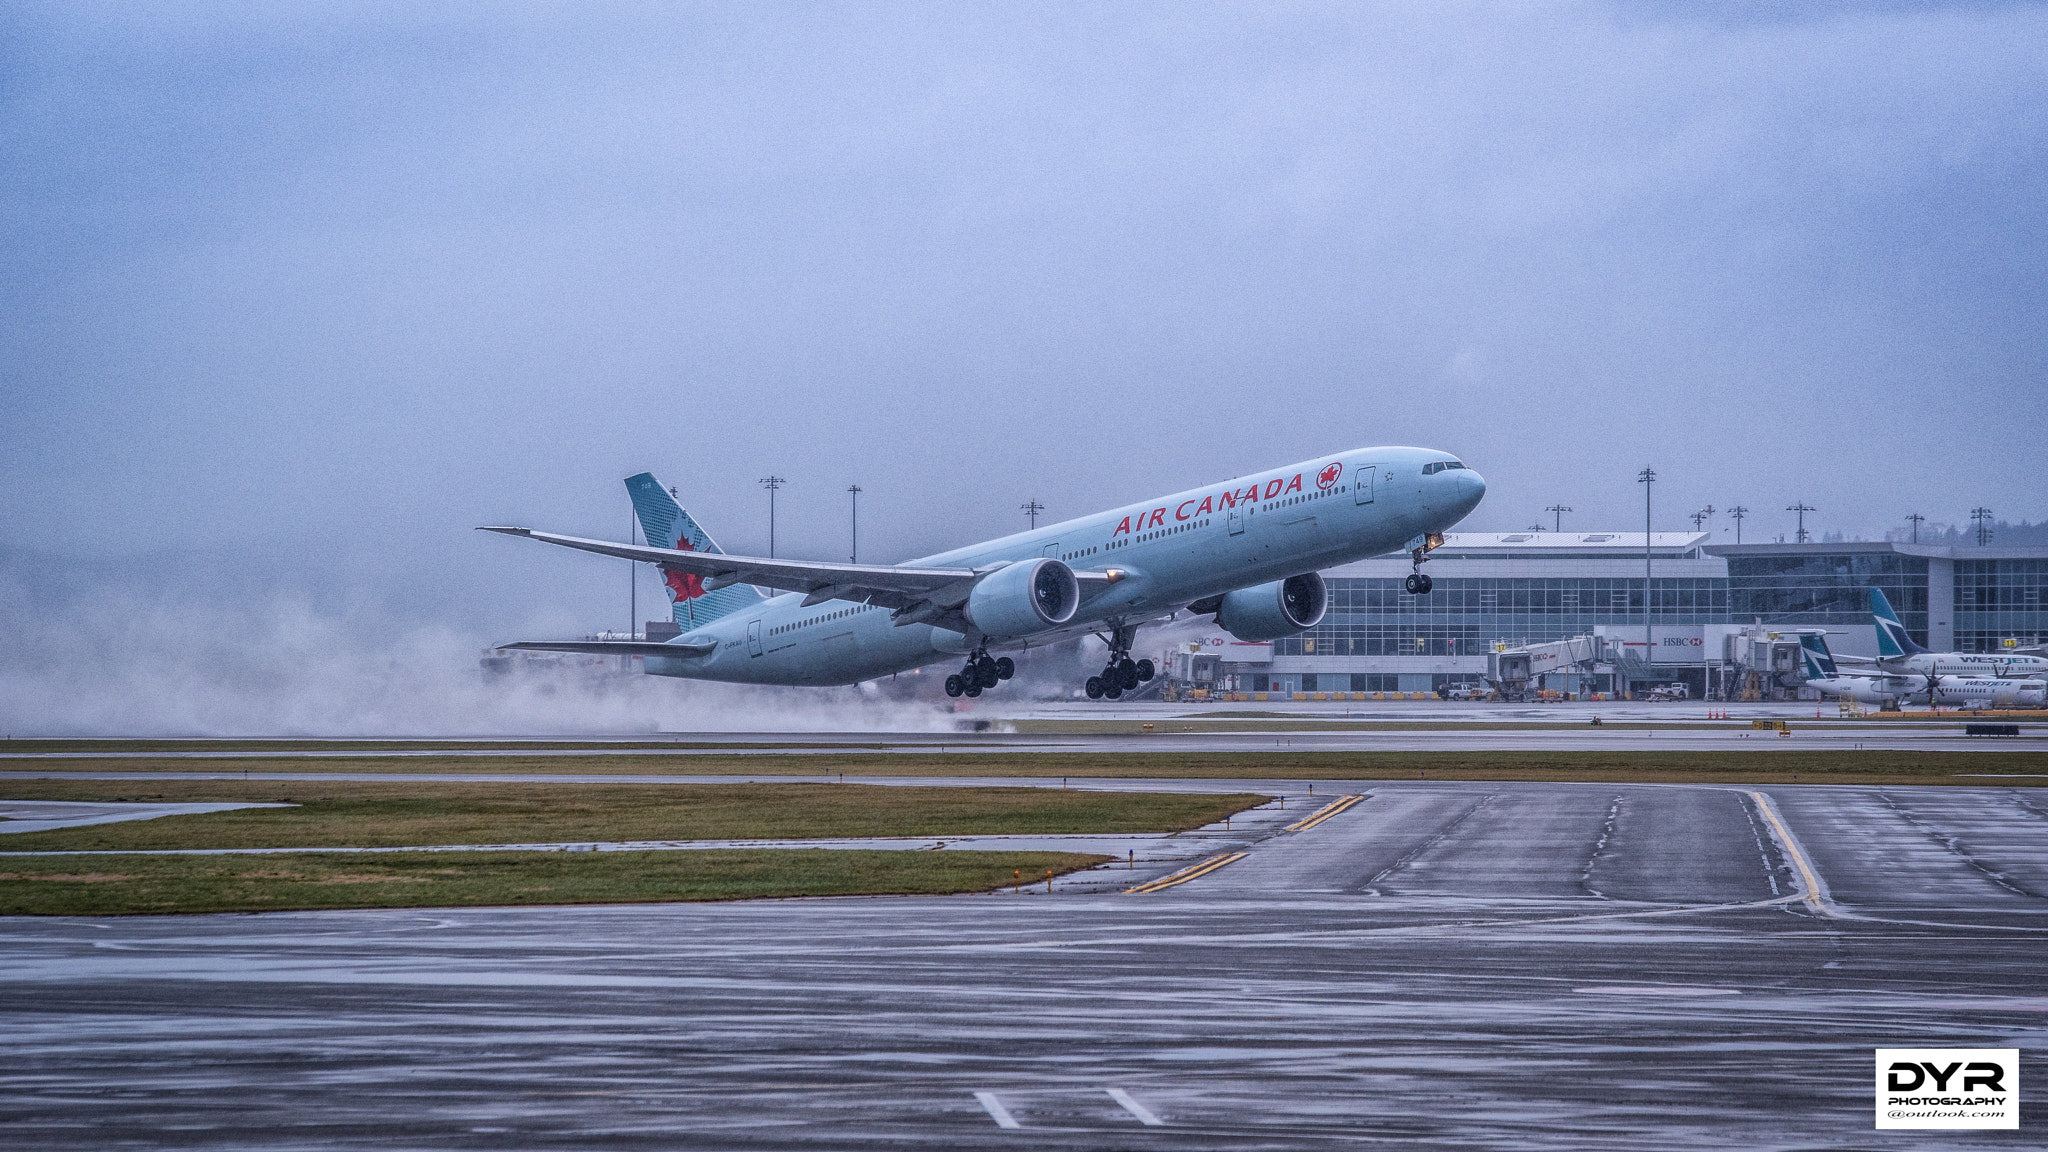 Pentax K-1 sample photo. Air canada departing yvr airport photography